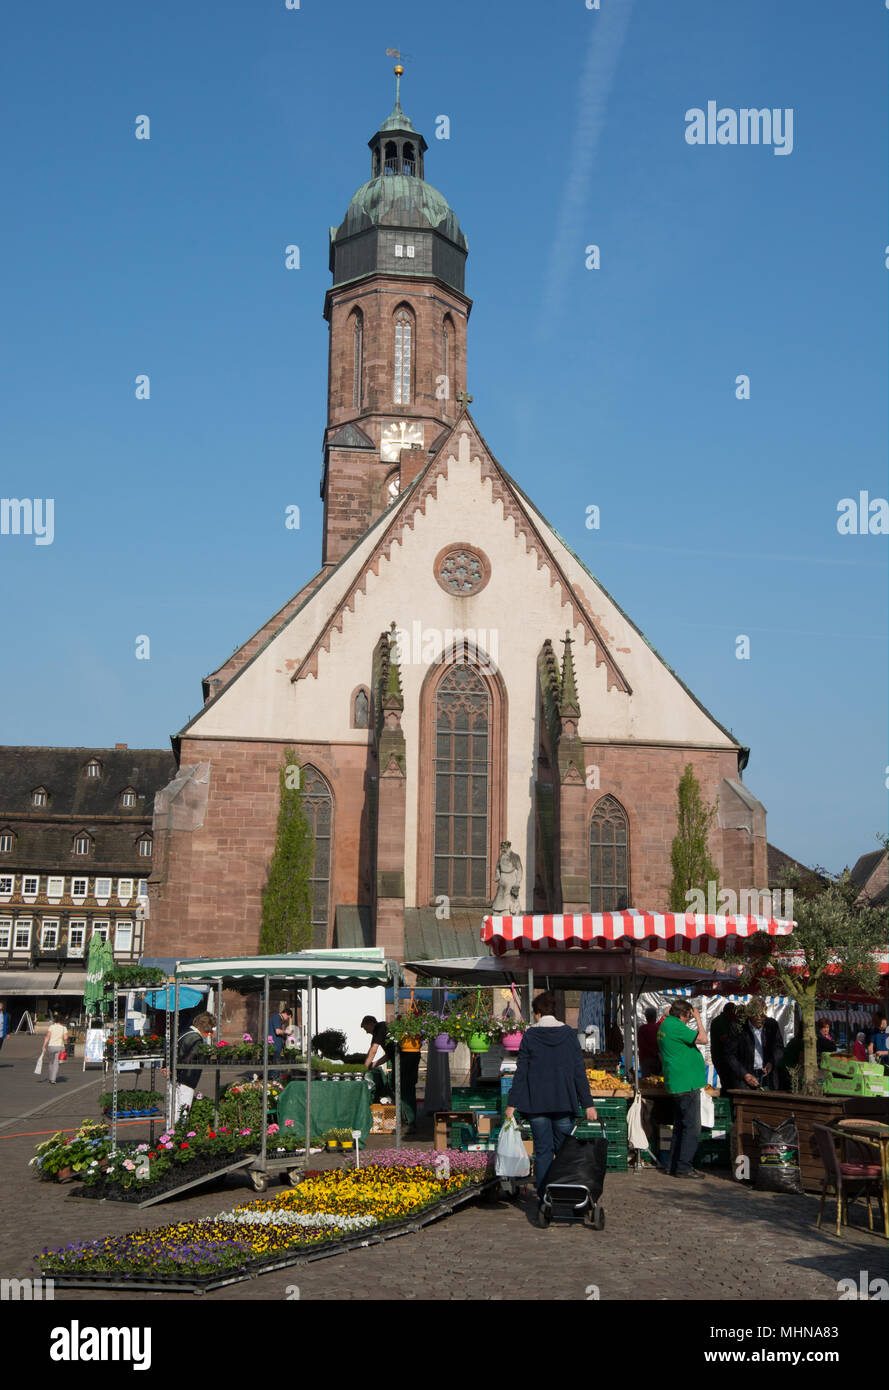 The Saturday morning held in the from of the Marktkirche St. Jacobi in Einbeck, Lower Saxony, Germany Stock Photo